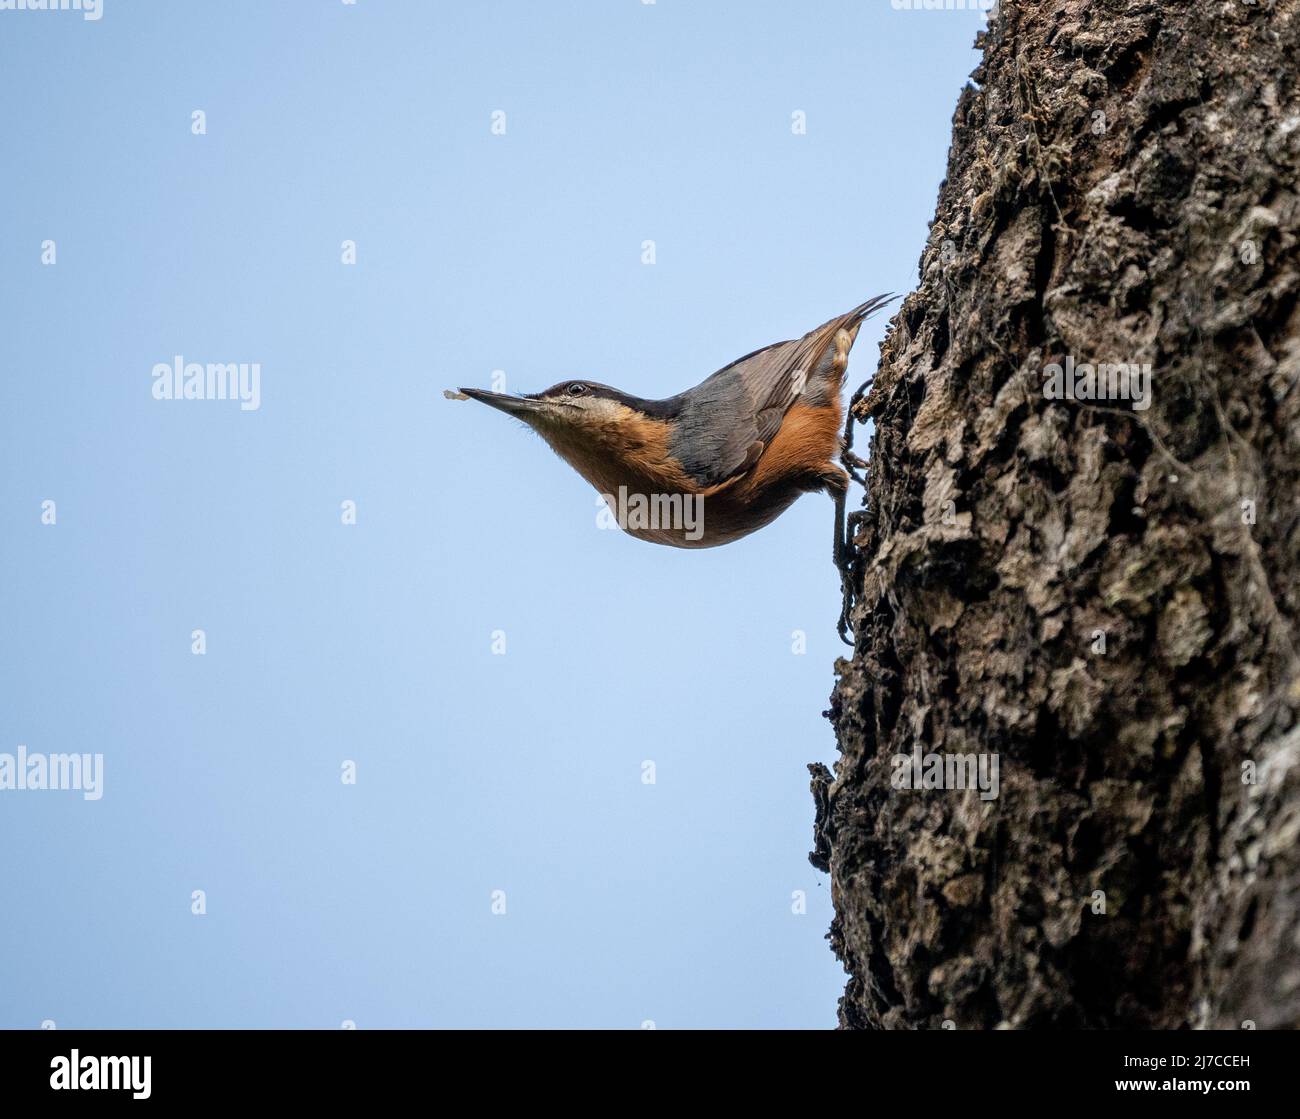 A Chestnut Bellied Nuthatch perched on the side of a tree with something in its beak. Stock Photo